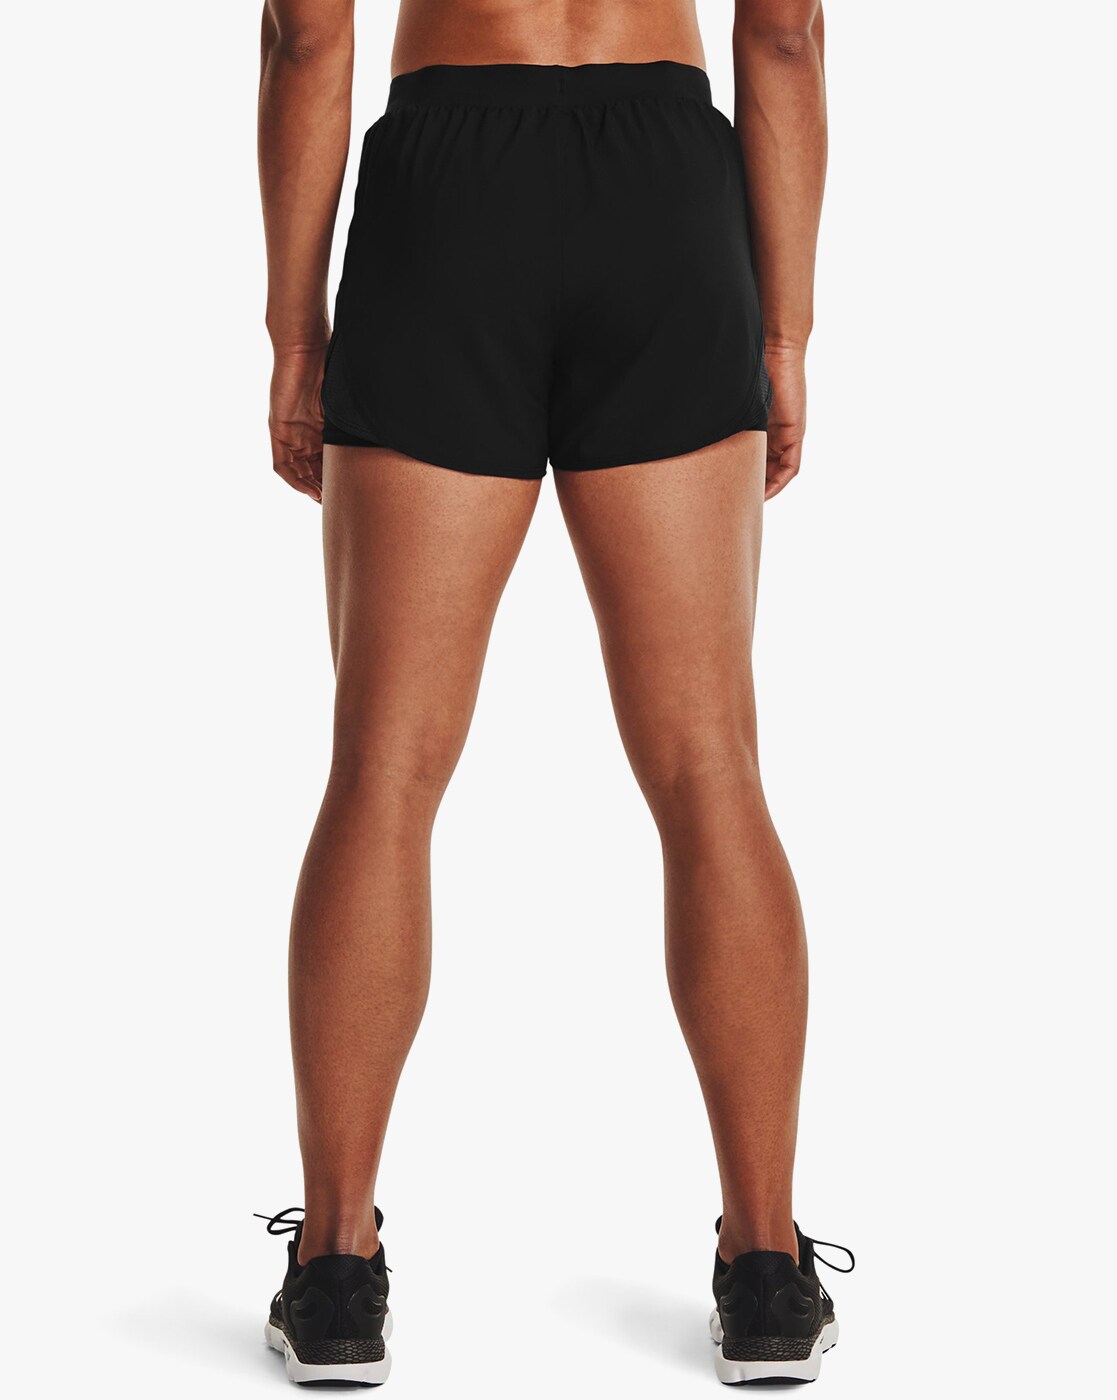 Buy Black Shorts for Women by Under Armour Online